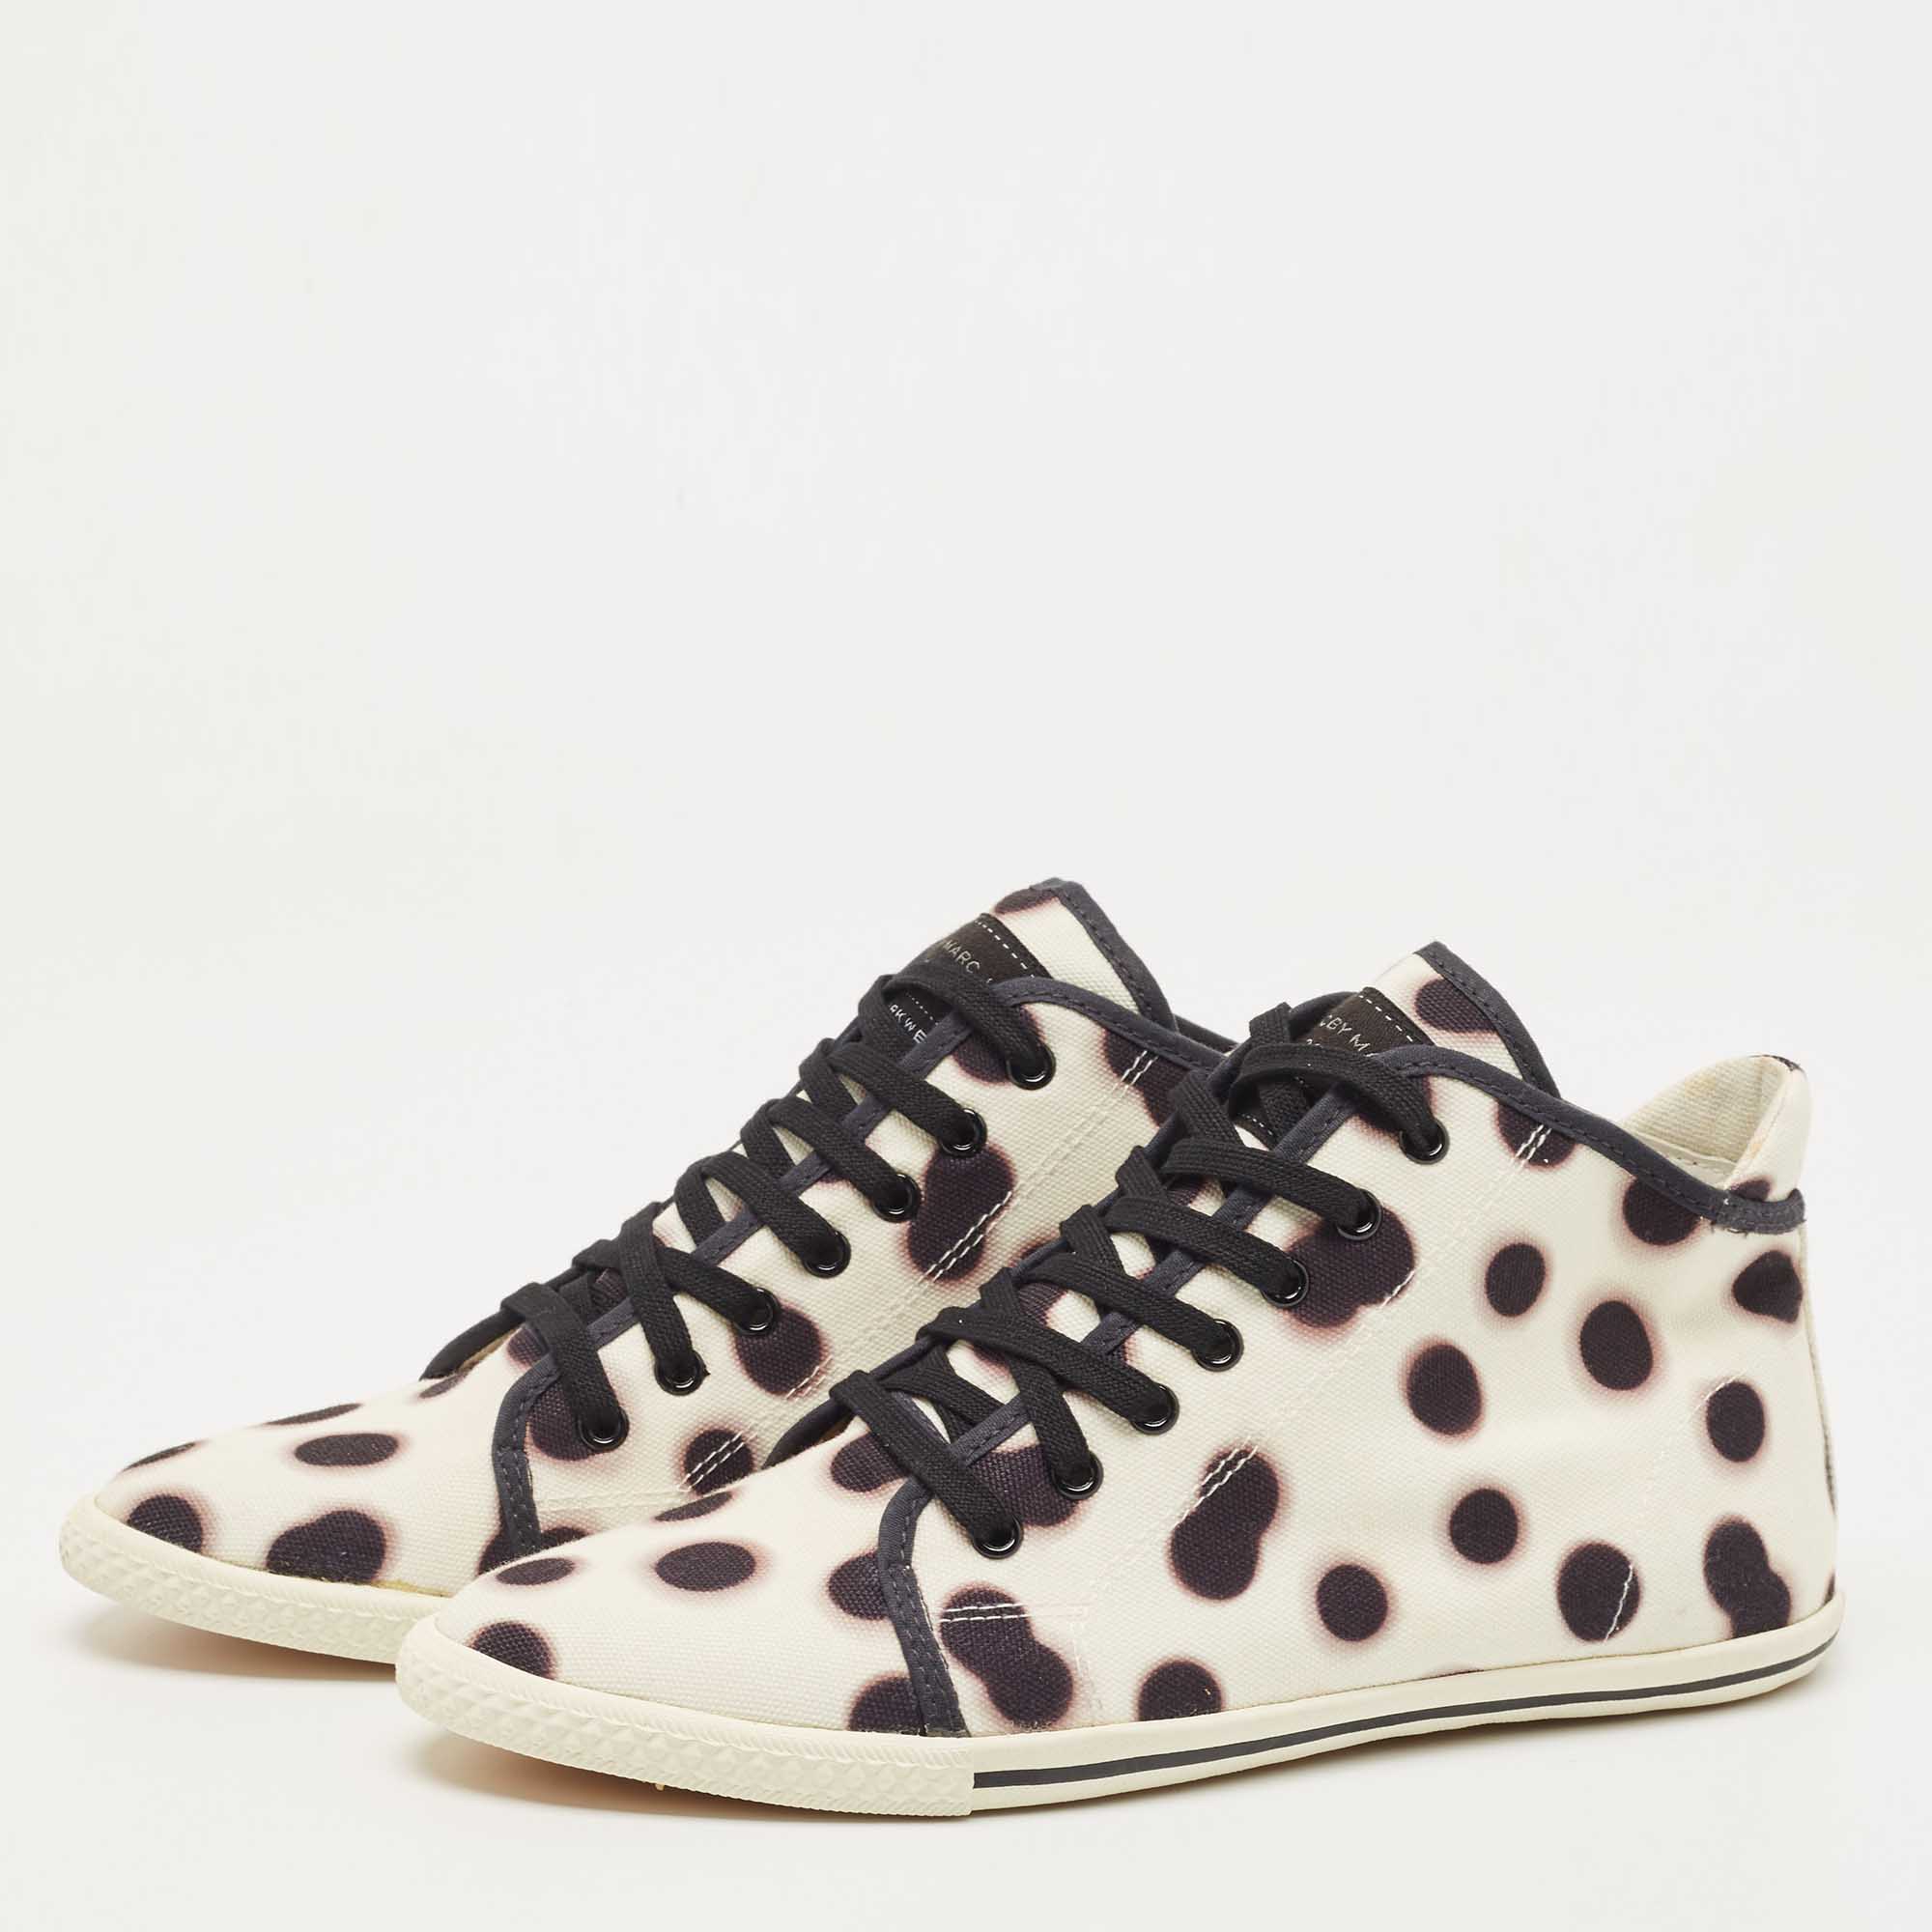 

Marc by Marc Jacobs White And Black Canvas Polka Dot High Top Sneakers Size